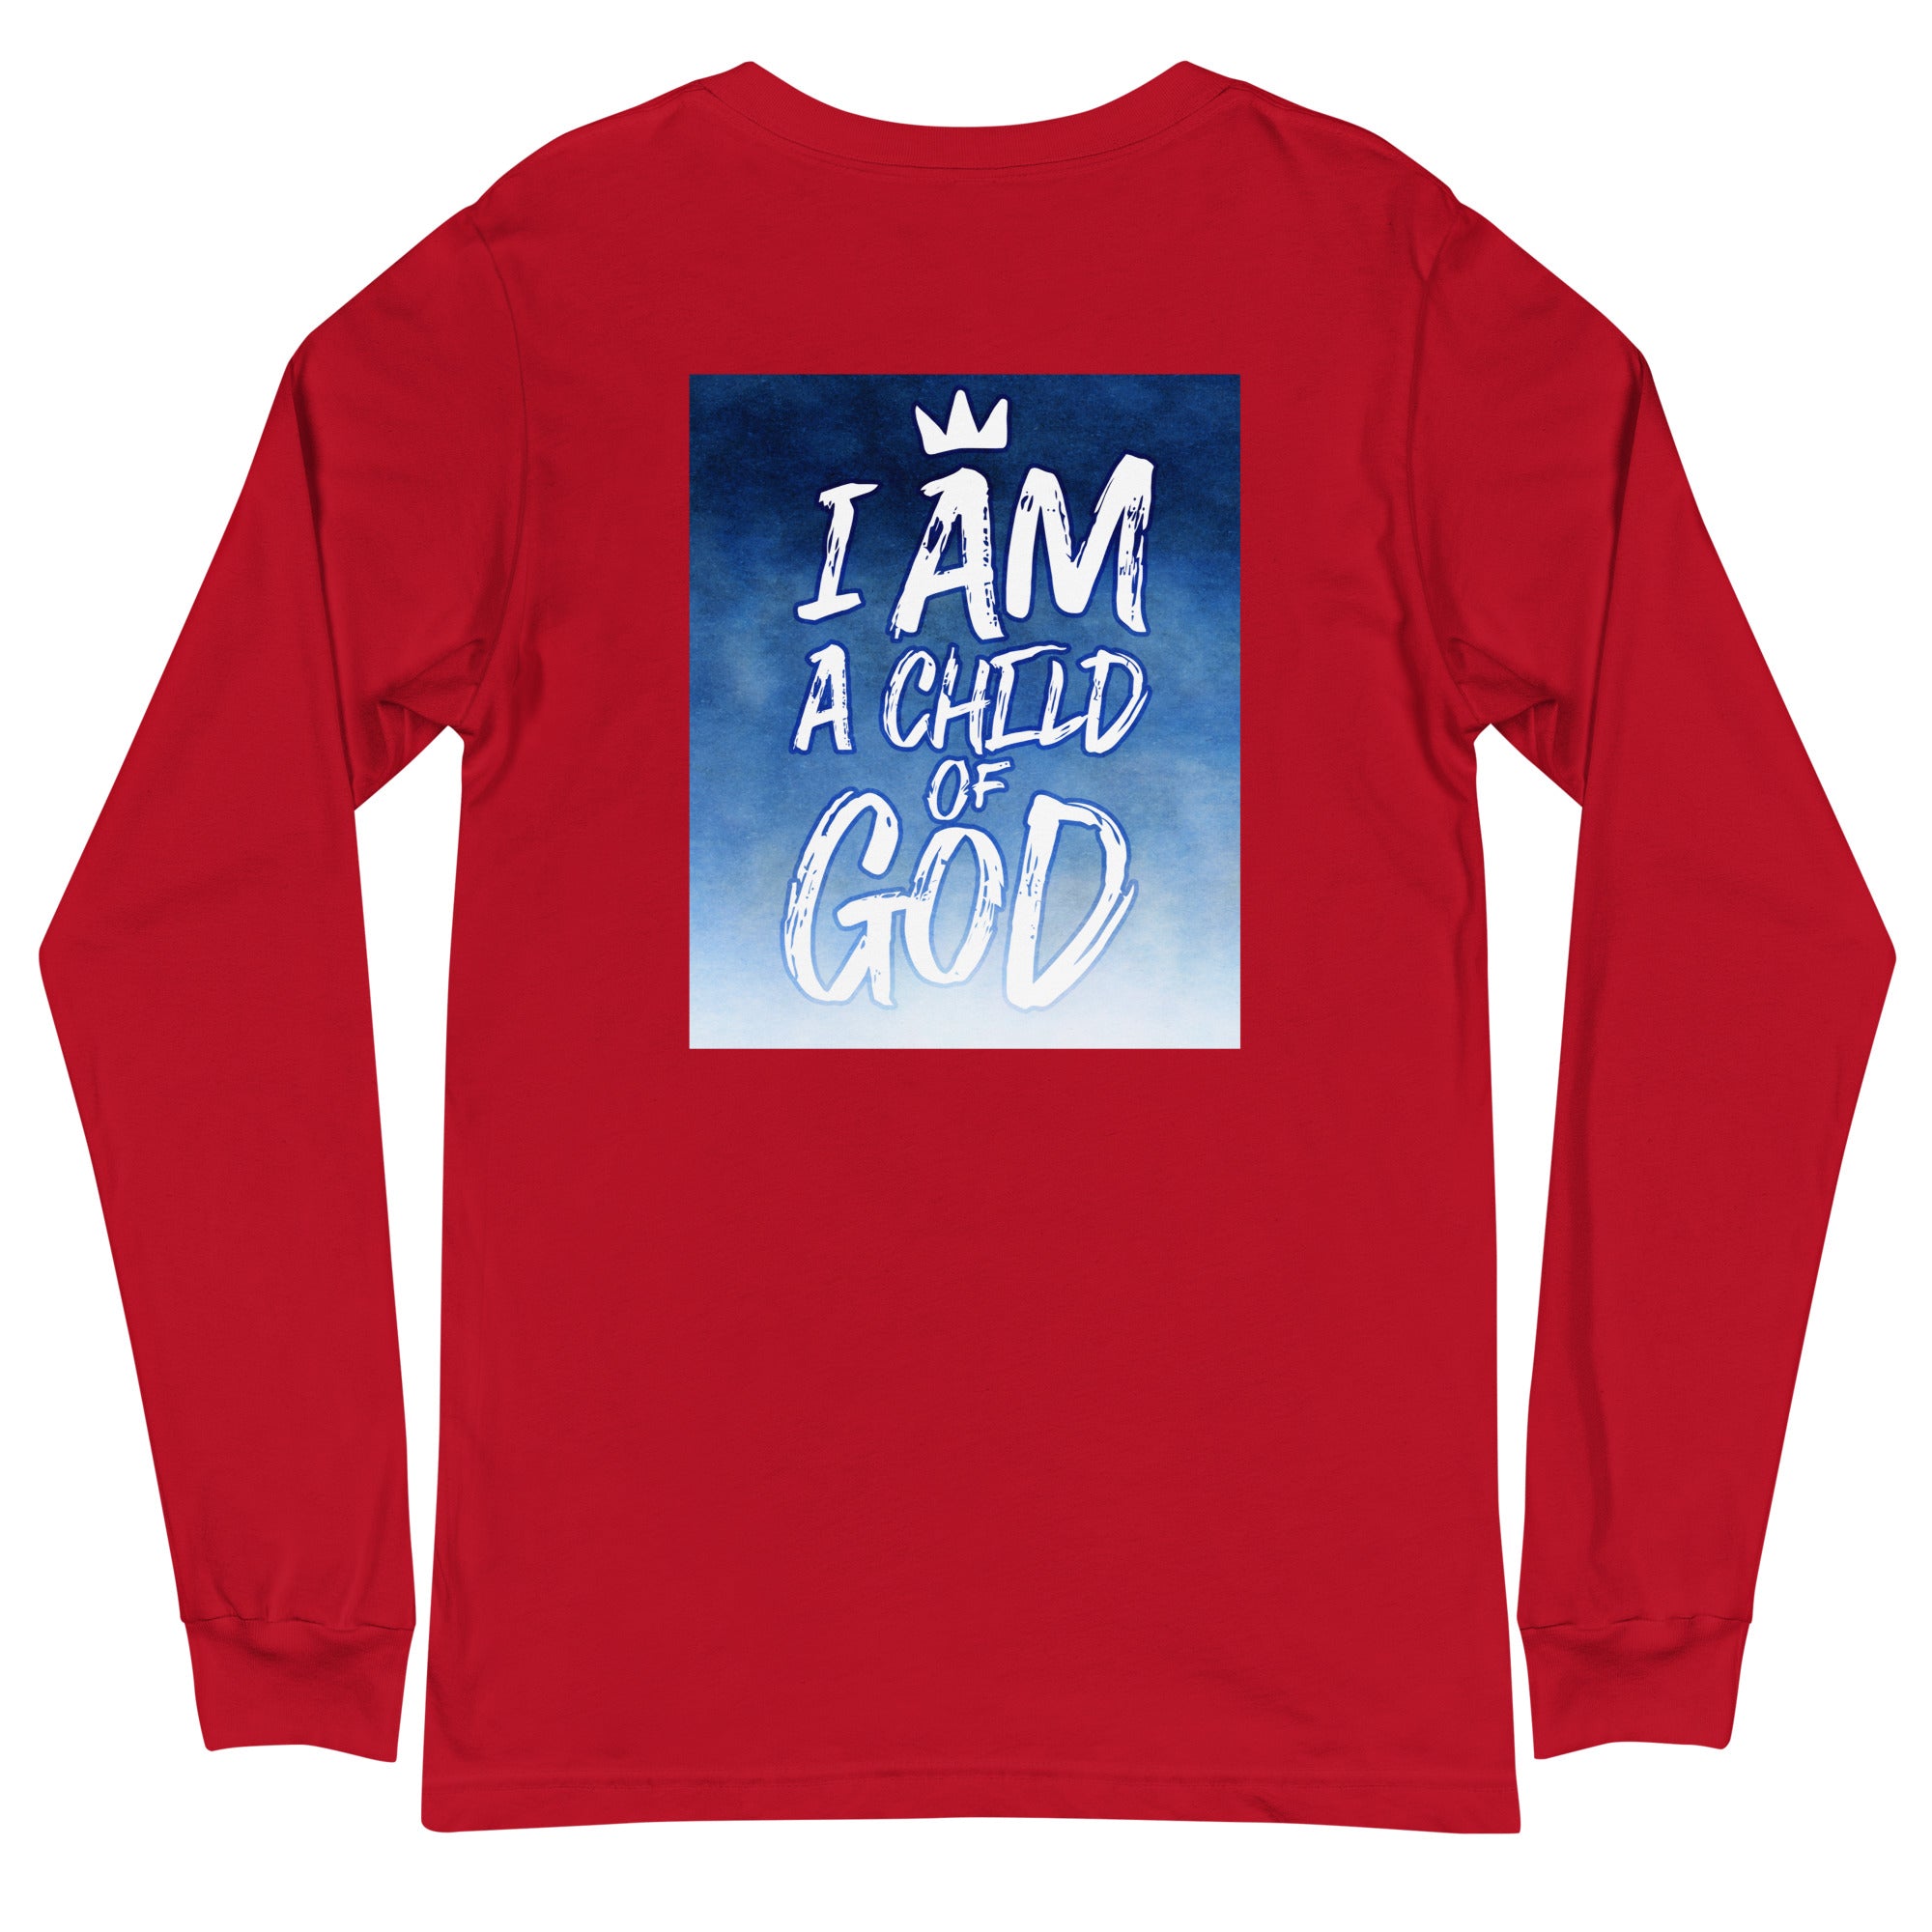 Men's Crew Neck T Shirt |CHILD OF GOD Long Sleeve Tee| Get Blessed Now